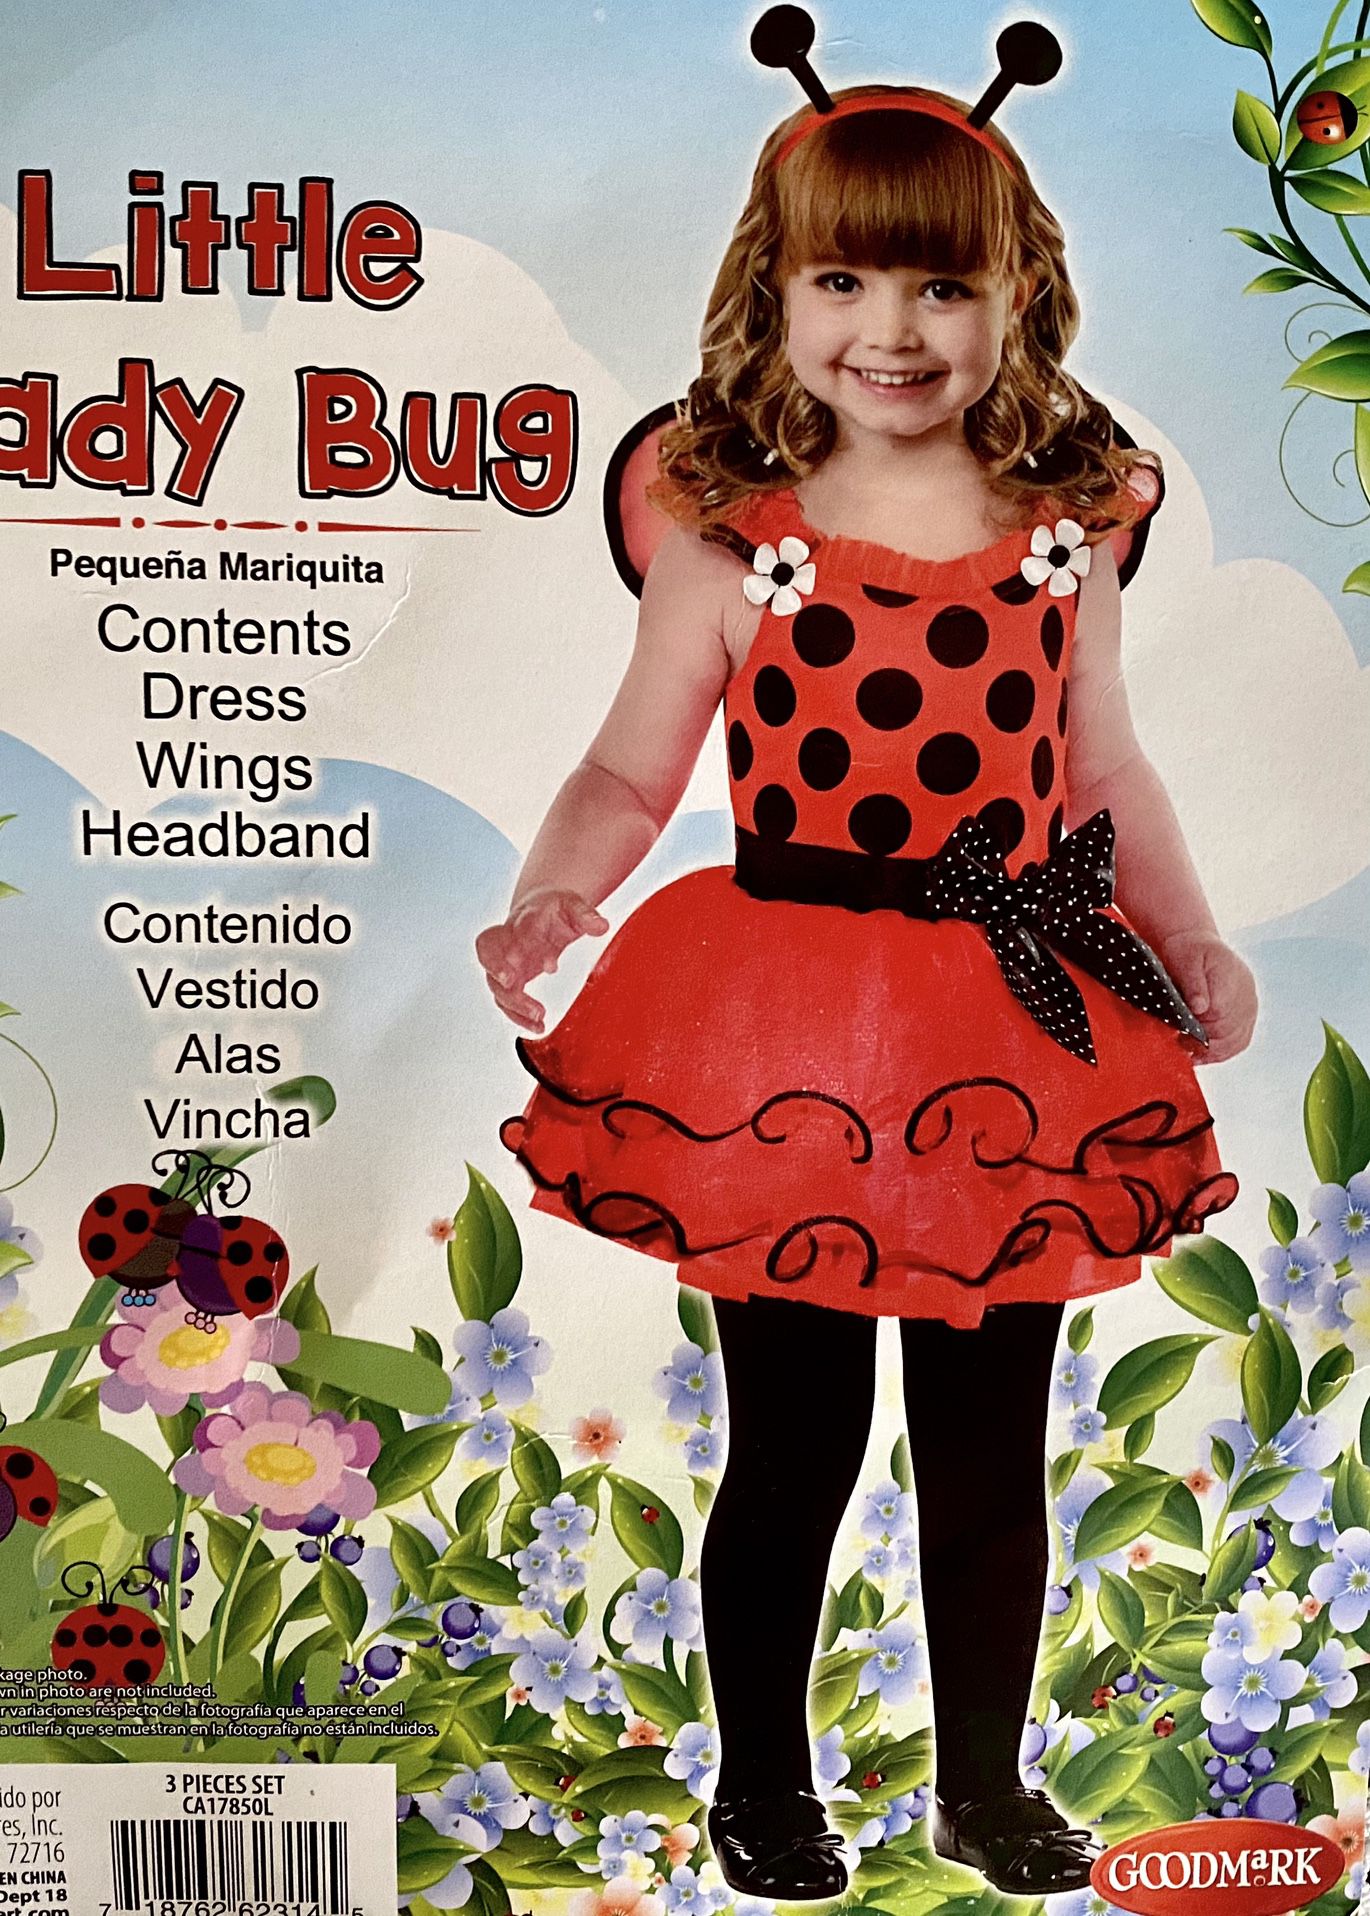 Cute Lady Bug Halloween Costume Size 3T-4T